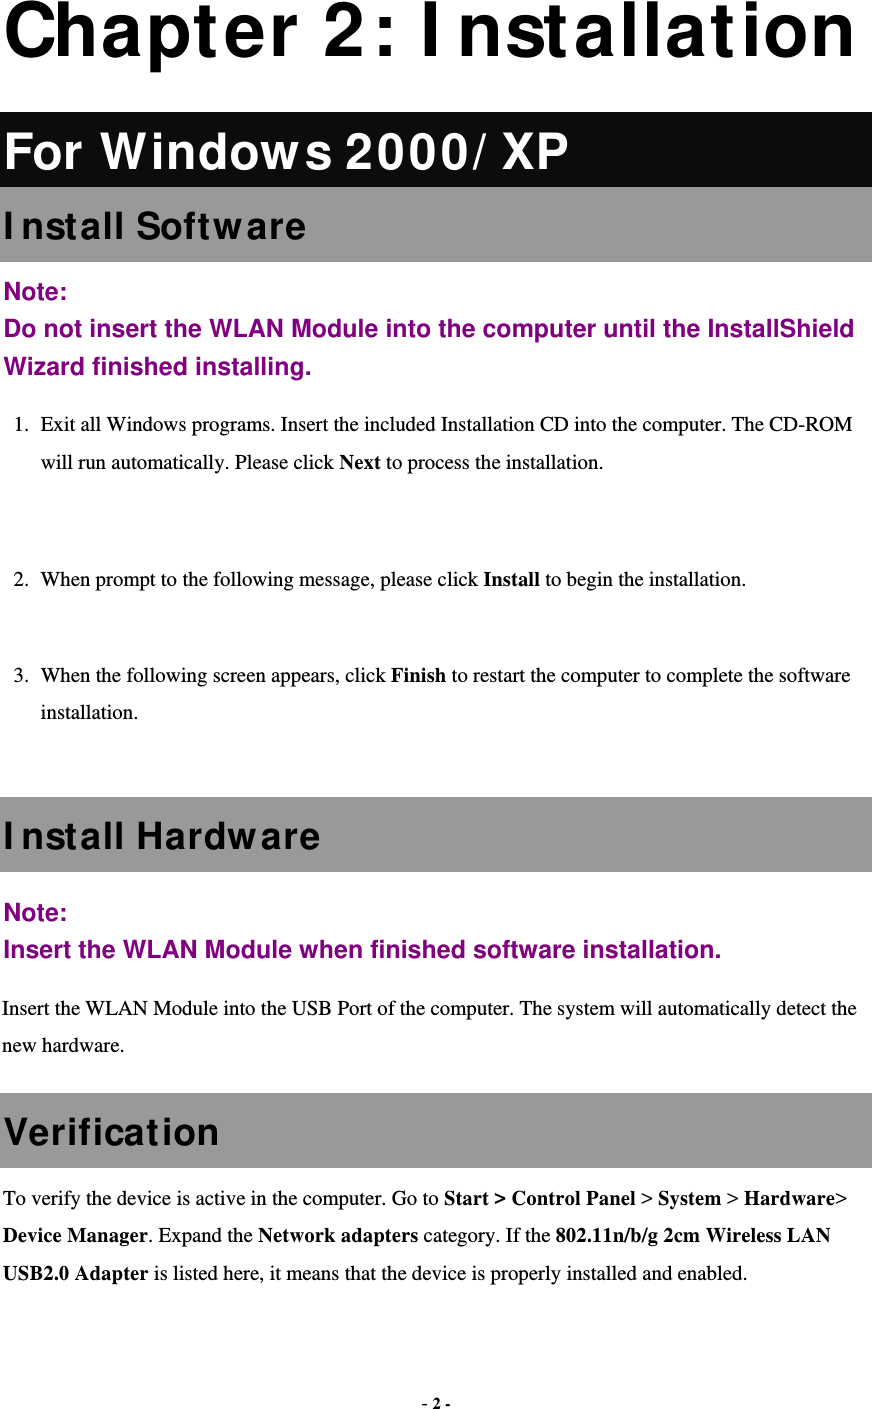  - 2 -  Chapter 2: I nstallation For Window s 2000/ XP I nstall Software Note:  Do not insert the WLAN Module into the computer until the InstallShield Wizard finished installing. 1.  Exit all Windows programs. Insert the included Installation CD into the computer. The CD-ROM will run automatically. Please click Next to process the installation.  2.  When prompt to the following message, please click Install to begin the installation.  3.  When the following screen appears, click Finish to restart the computer to complete the software installation.  I nstall Hardw are Note:  Insert the WLAN Module when finished software installation. Insert the WLAN Module into the USB Port of the computer. The system will automatically detect the new hardware. Verification To verify the device is active in the computer. Go to Start &gt; Control Panel &gt; System &gt; Hardware&gt; Device Manager. Expand the Network adapters category. If the 802.11n/b/g 2cm Wireless LAN USB2.0 Adapter is listed here, it means that the device is properly installed and enabled. 